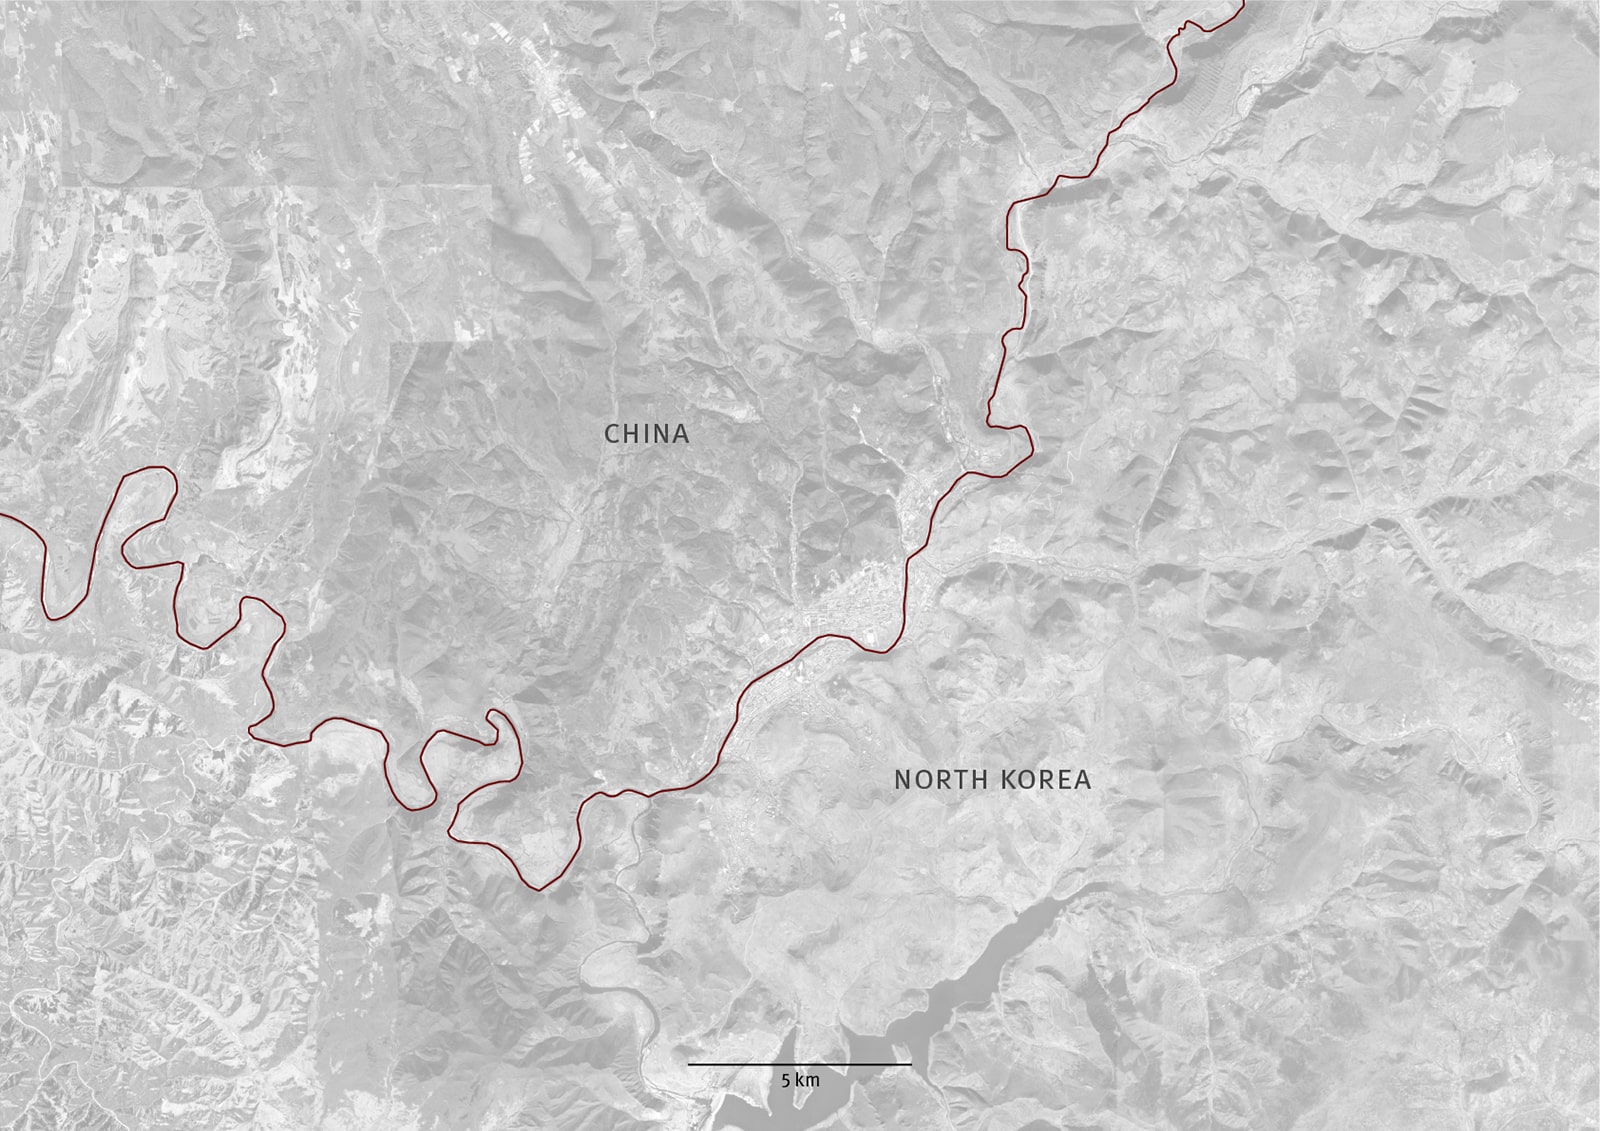 Satelite image of Chunggang and mine region